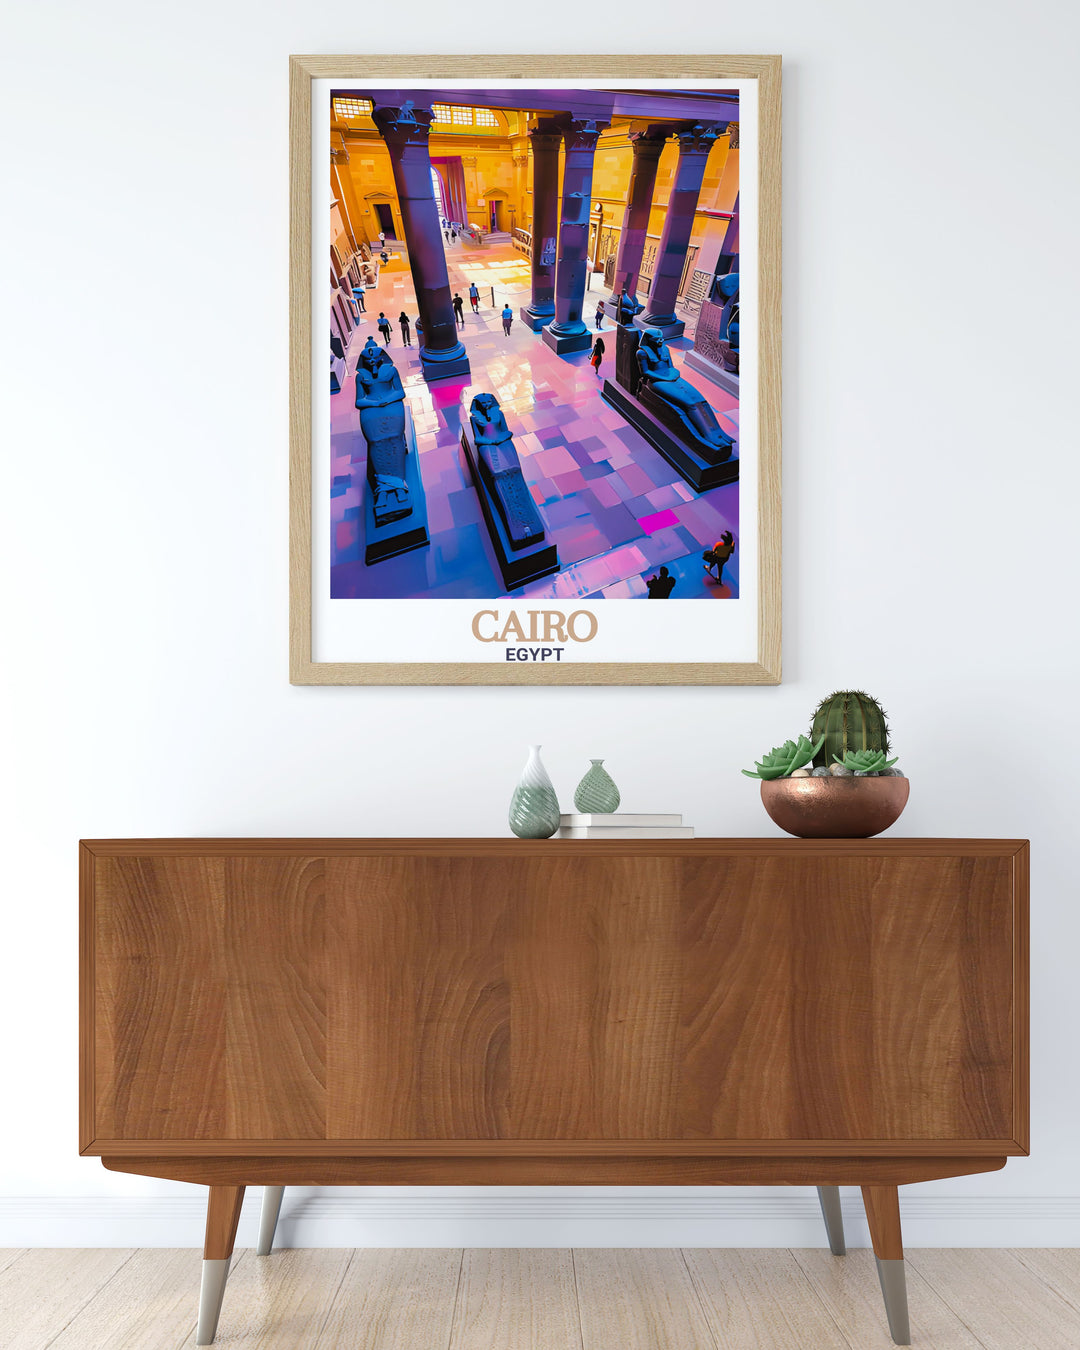 Transform your space with this captivating Egyptian Museum travel poster featuring the skyline and cityscape of Cairo perfect for adding a touch of historical charm to your decor.